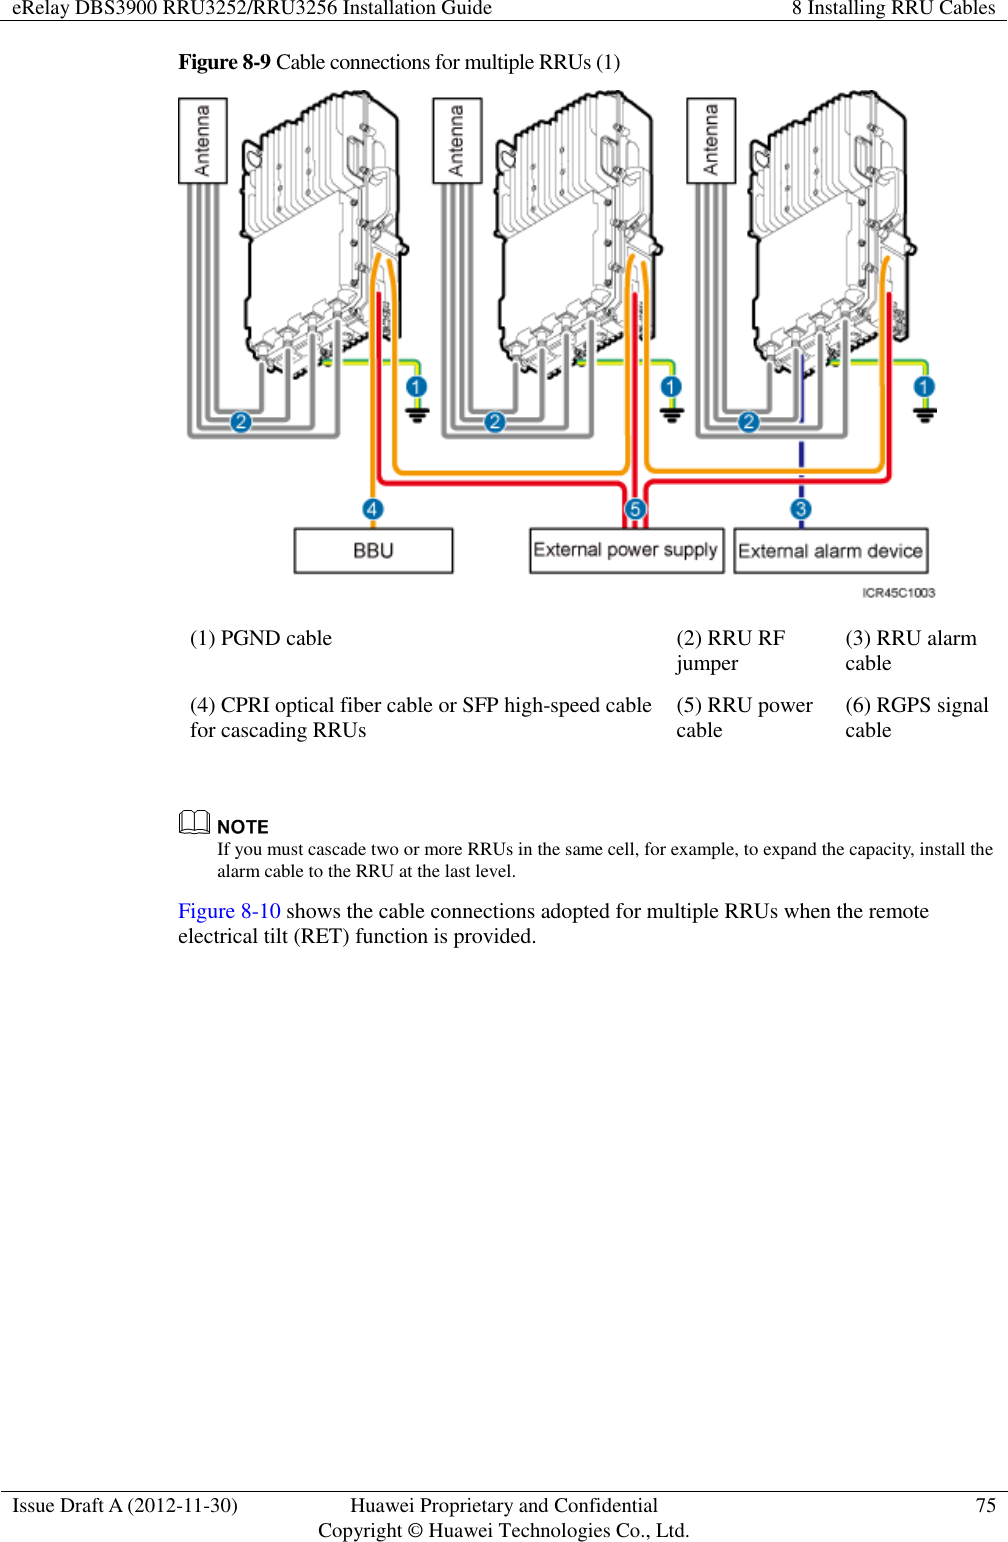 eRelay DBS3900 RRU3252/RRU3256 Installation Guide 8 Installing RRU Cables  Issue Draft A (2012-11-30) Huawei Proprietary and Confidential                                     Copyright © Huawei Technologies Co., Ltd. 75  Figure 8-9 Cable connections for multiple RRUs (1)  (1) PGND cable (2) RRU RF jumper (3) RRU alarm cable (4) CPRI optical fiber cable or SFP high-speed cable for cascading RRUs (5) RRU power cable (6) RGPS signal cable   If you must cascade two or more RRUs in the same cell, for example, to expand the capacity, install the alarm cable to the RRU at the last level. Figure 8-10 shows the cable connections adopted for multiple RRUs when the remote electrical tilt (RET) function is provided. 